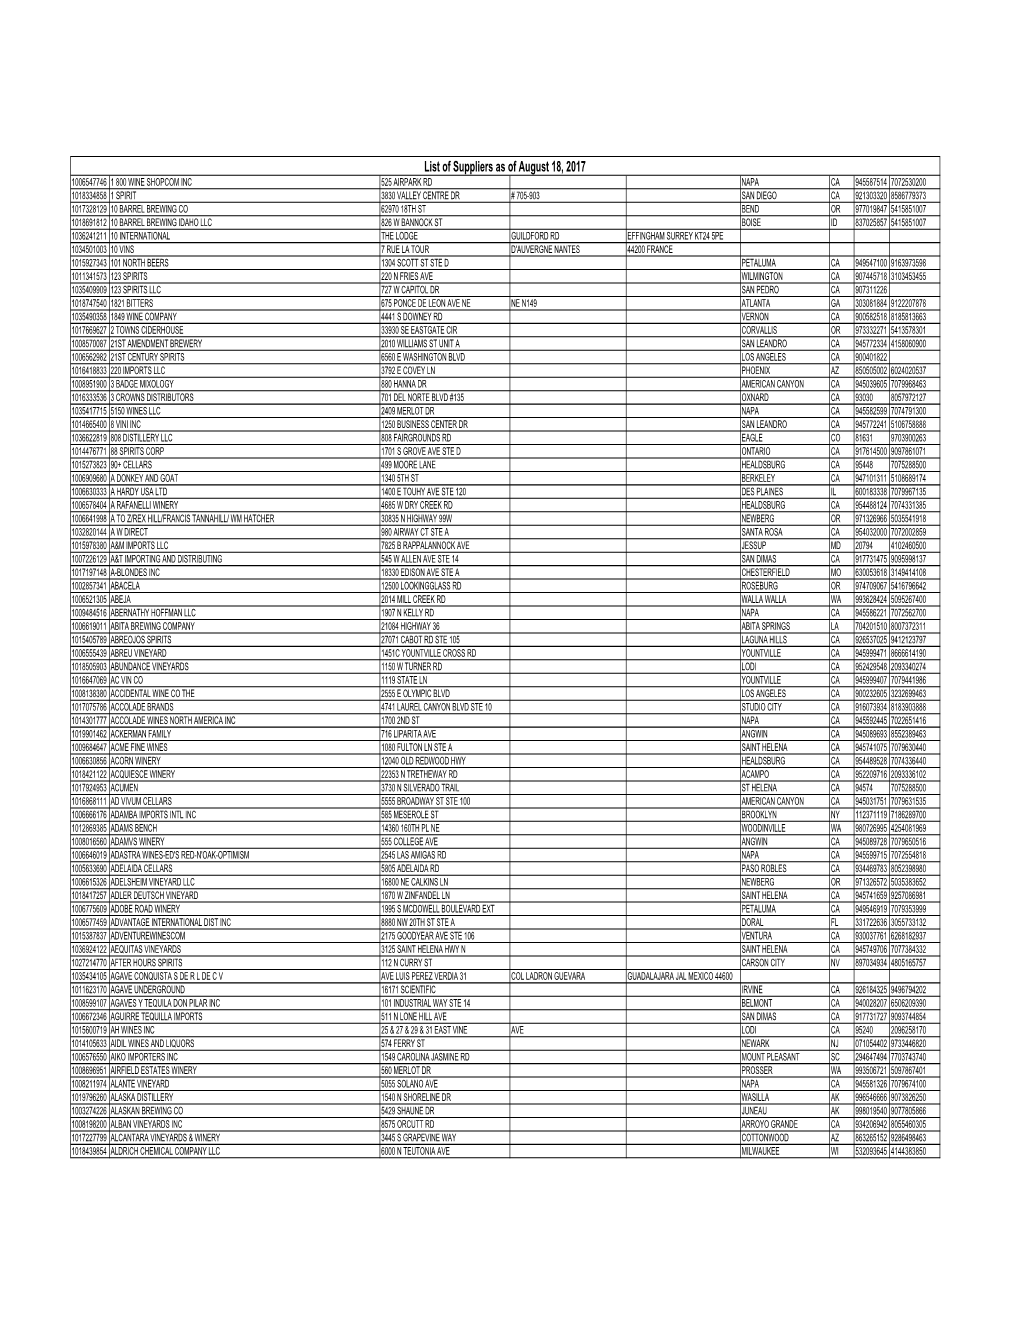 List of Suppliers As of August 18, 2017